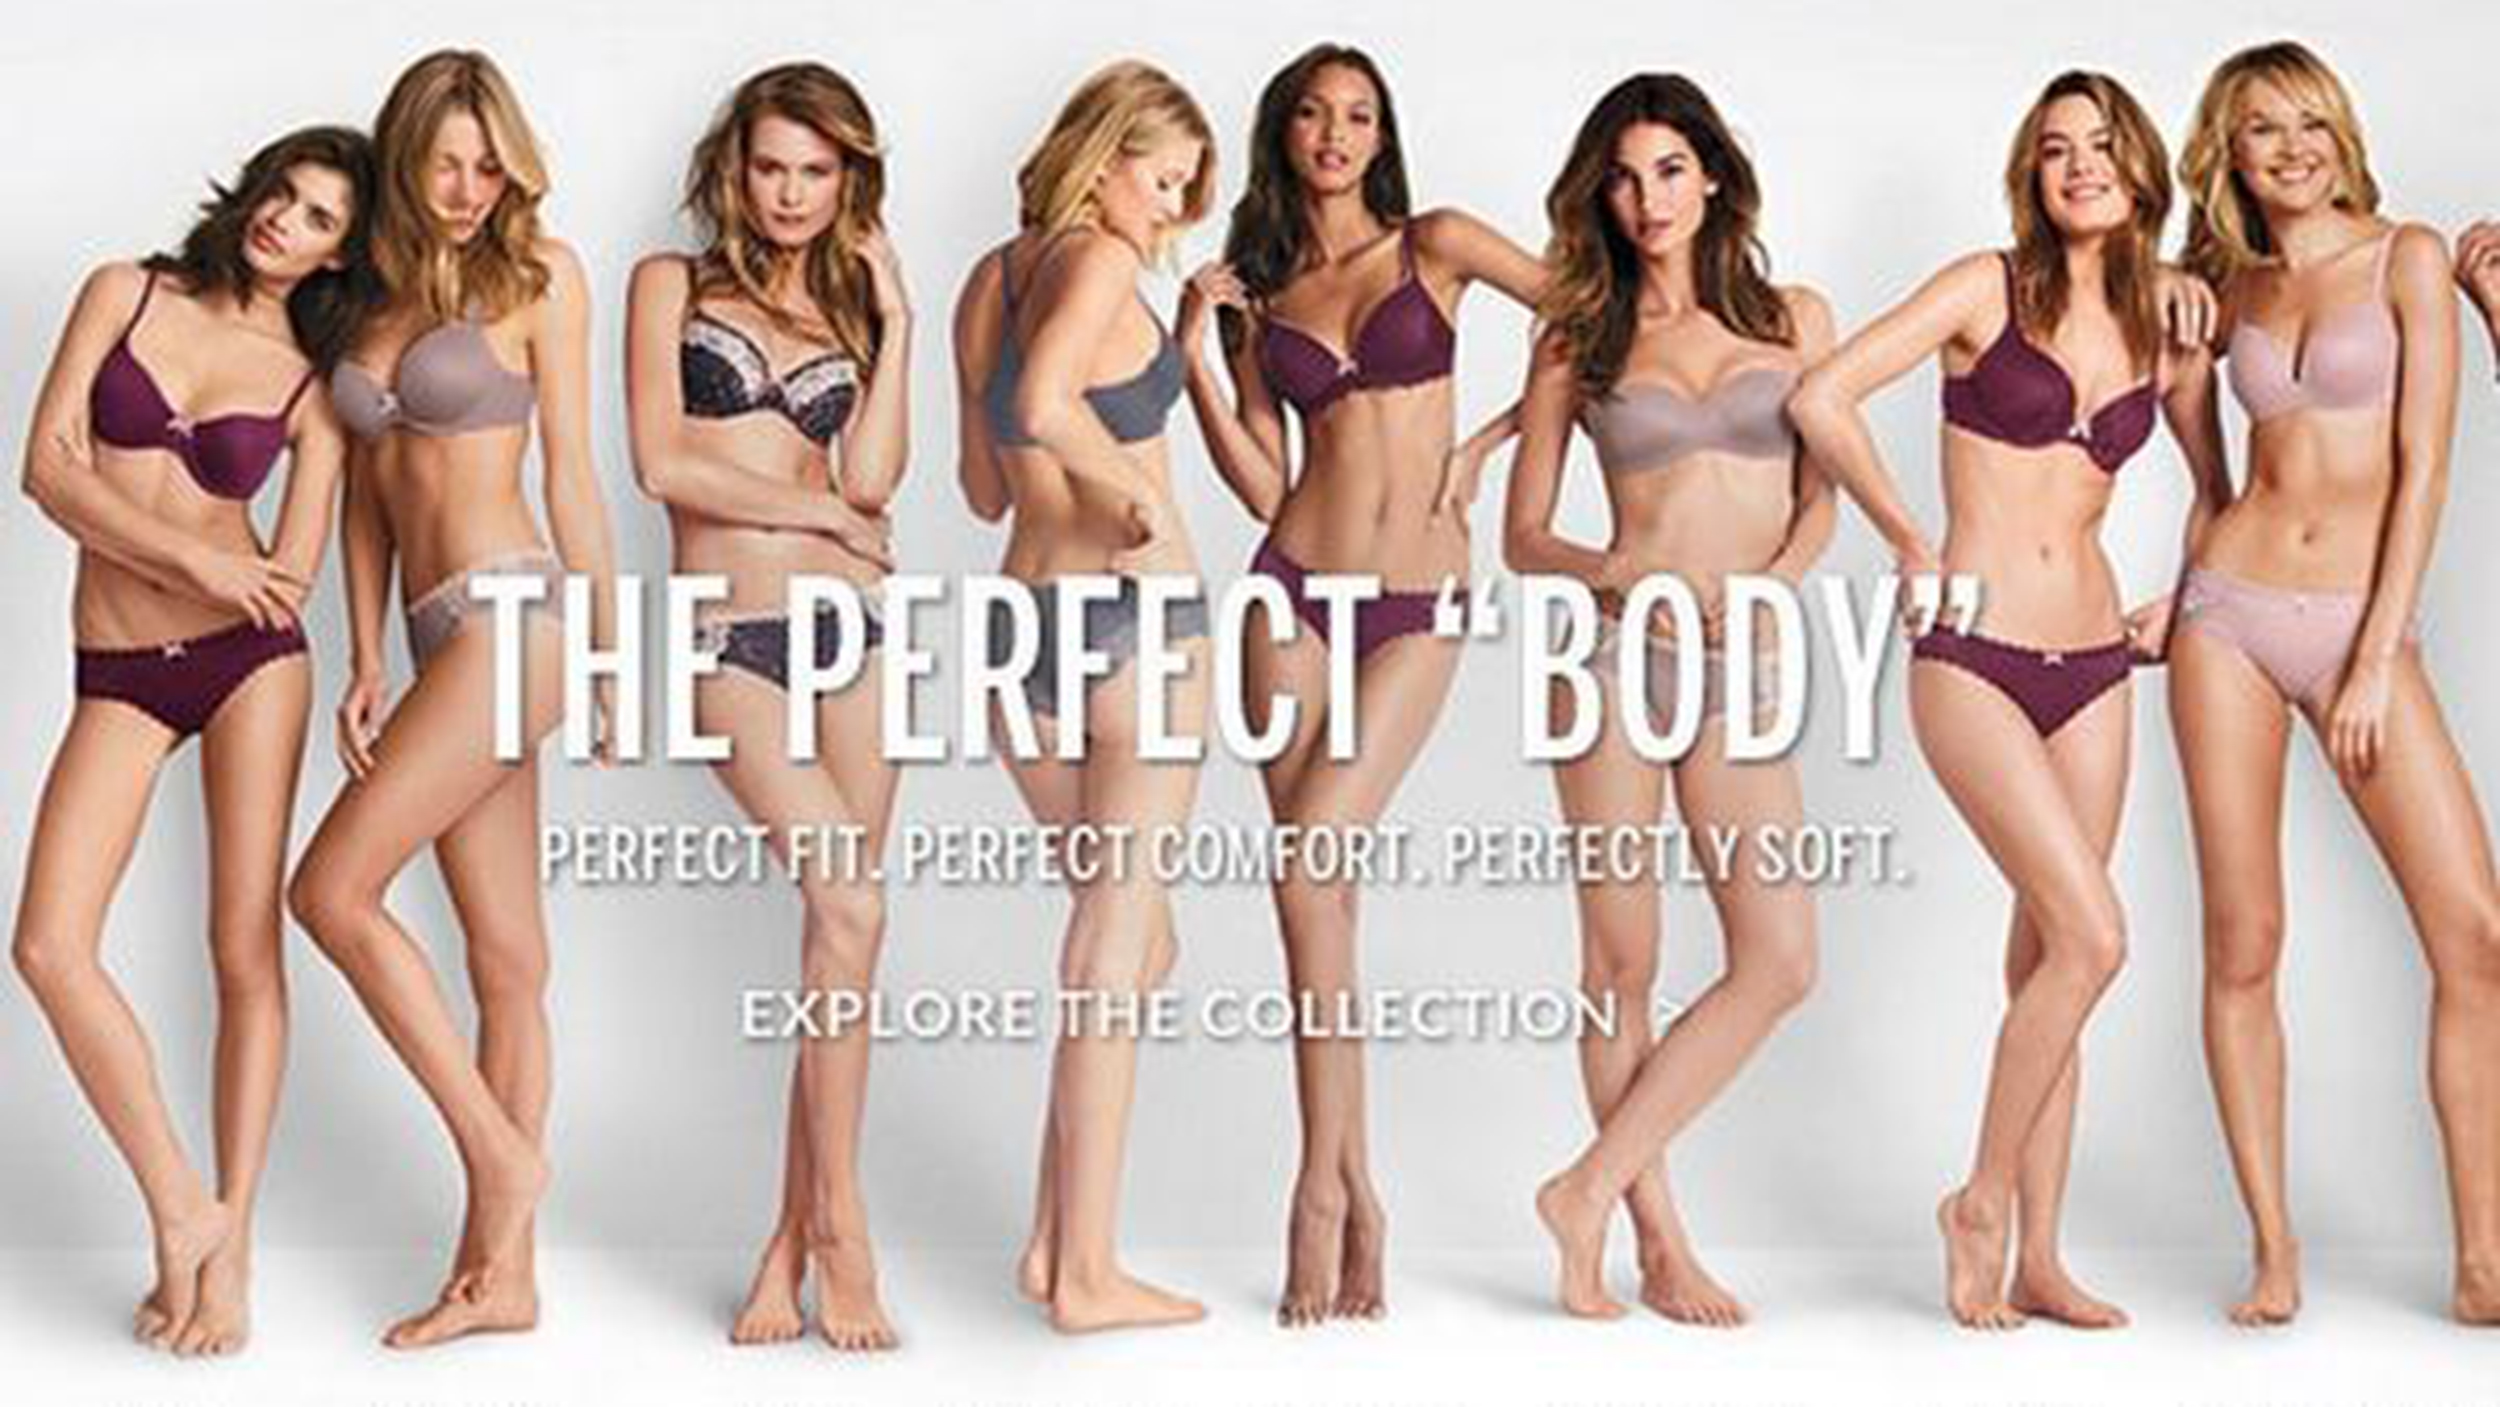 The Perfect Body: Victoria's Secret and Societal Beauty Standards